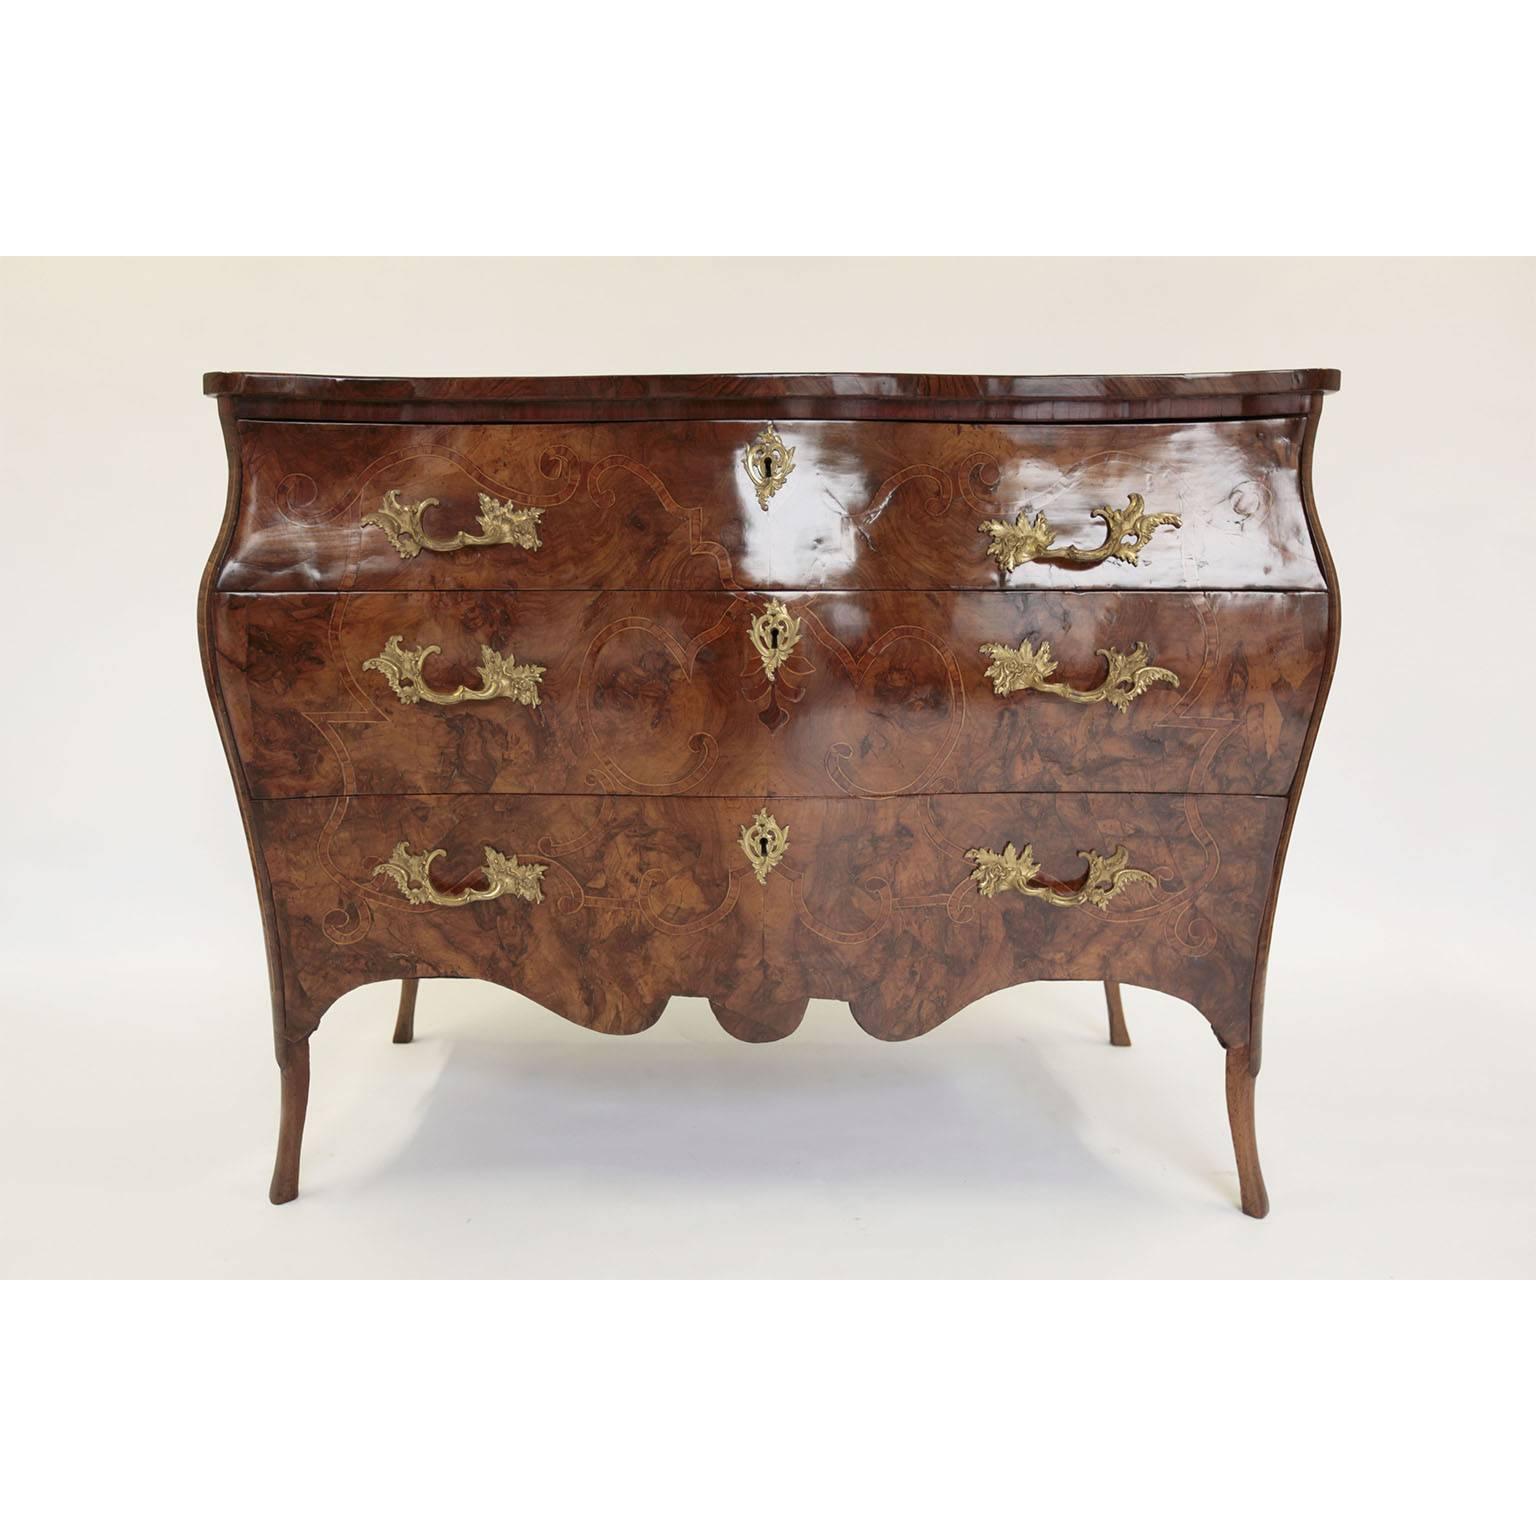 18th century Italian commode with a bombe' shape on front and sides.
Walnut burl veneer on front and side with elegant ornamental marquetry.
The decoration on the top is made with walnut veneer that joins in the centre and framed by an